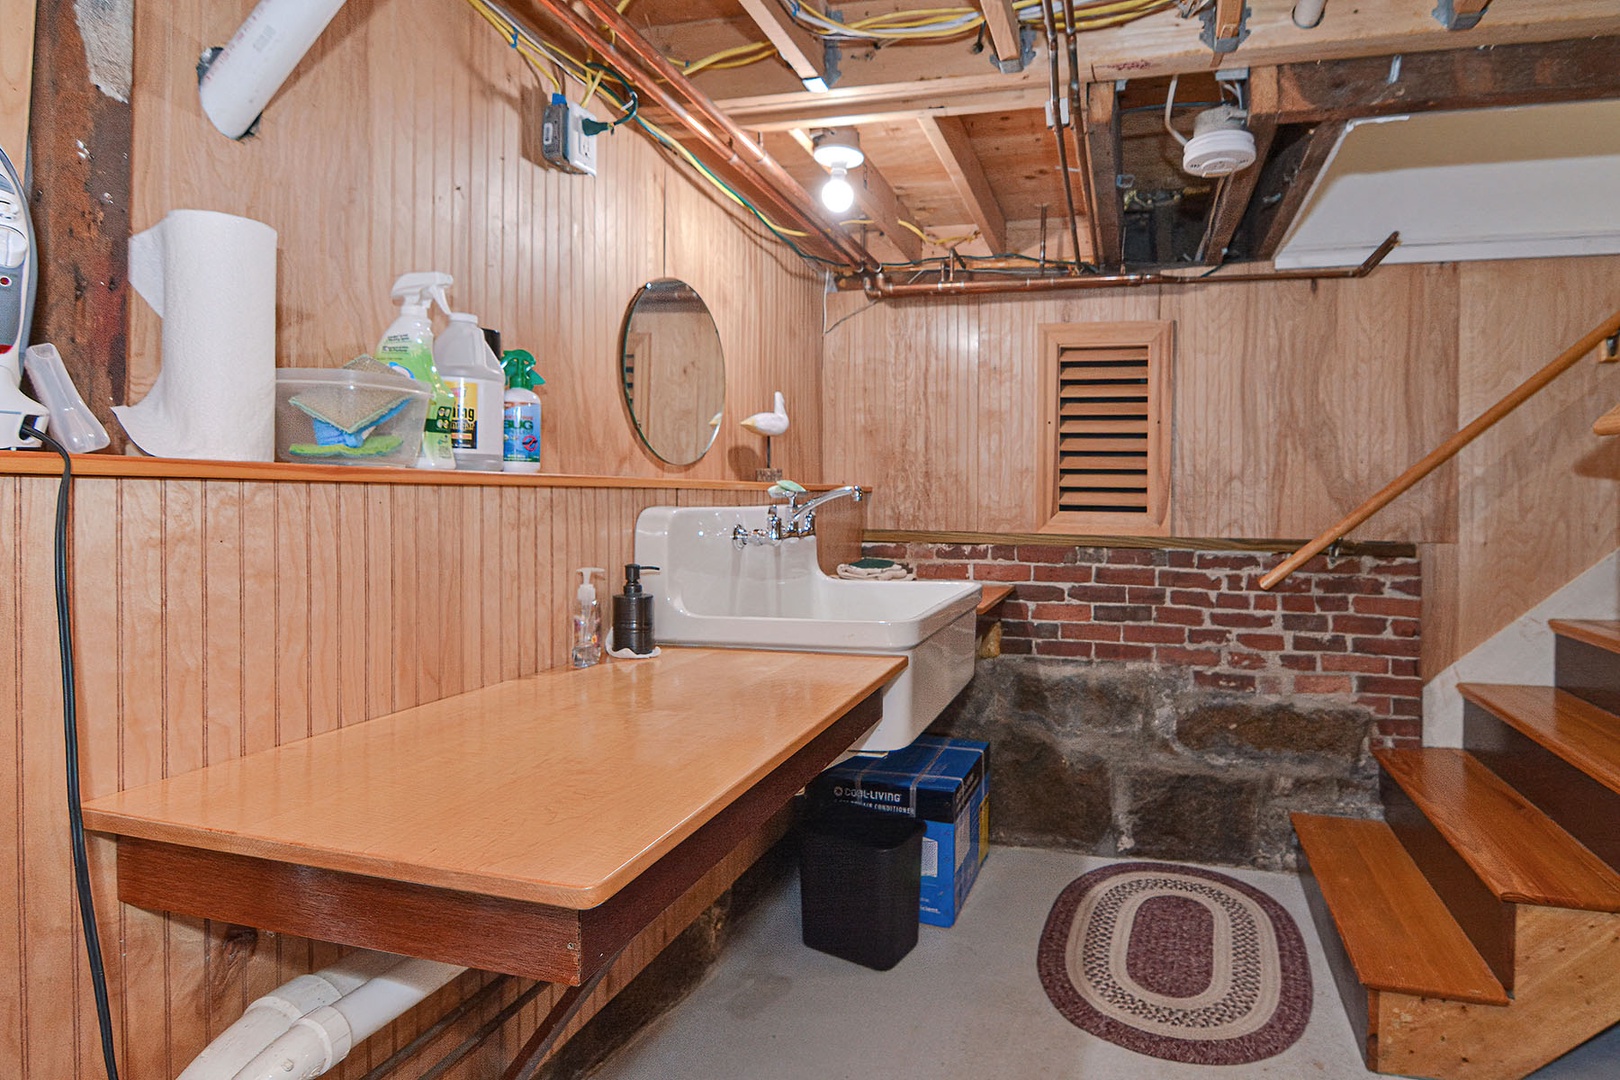 Basement laundry area and extra sink